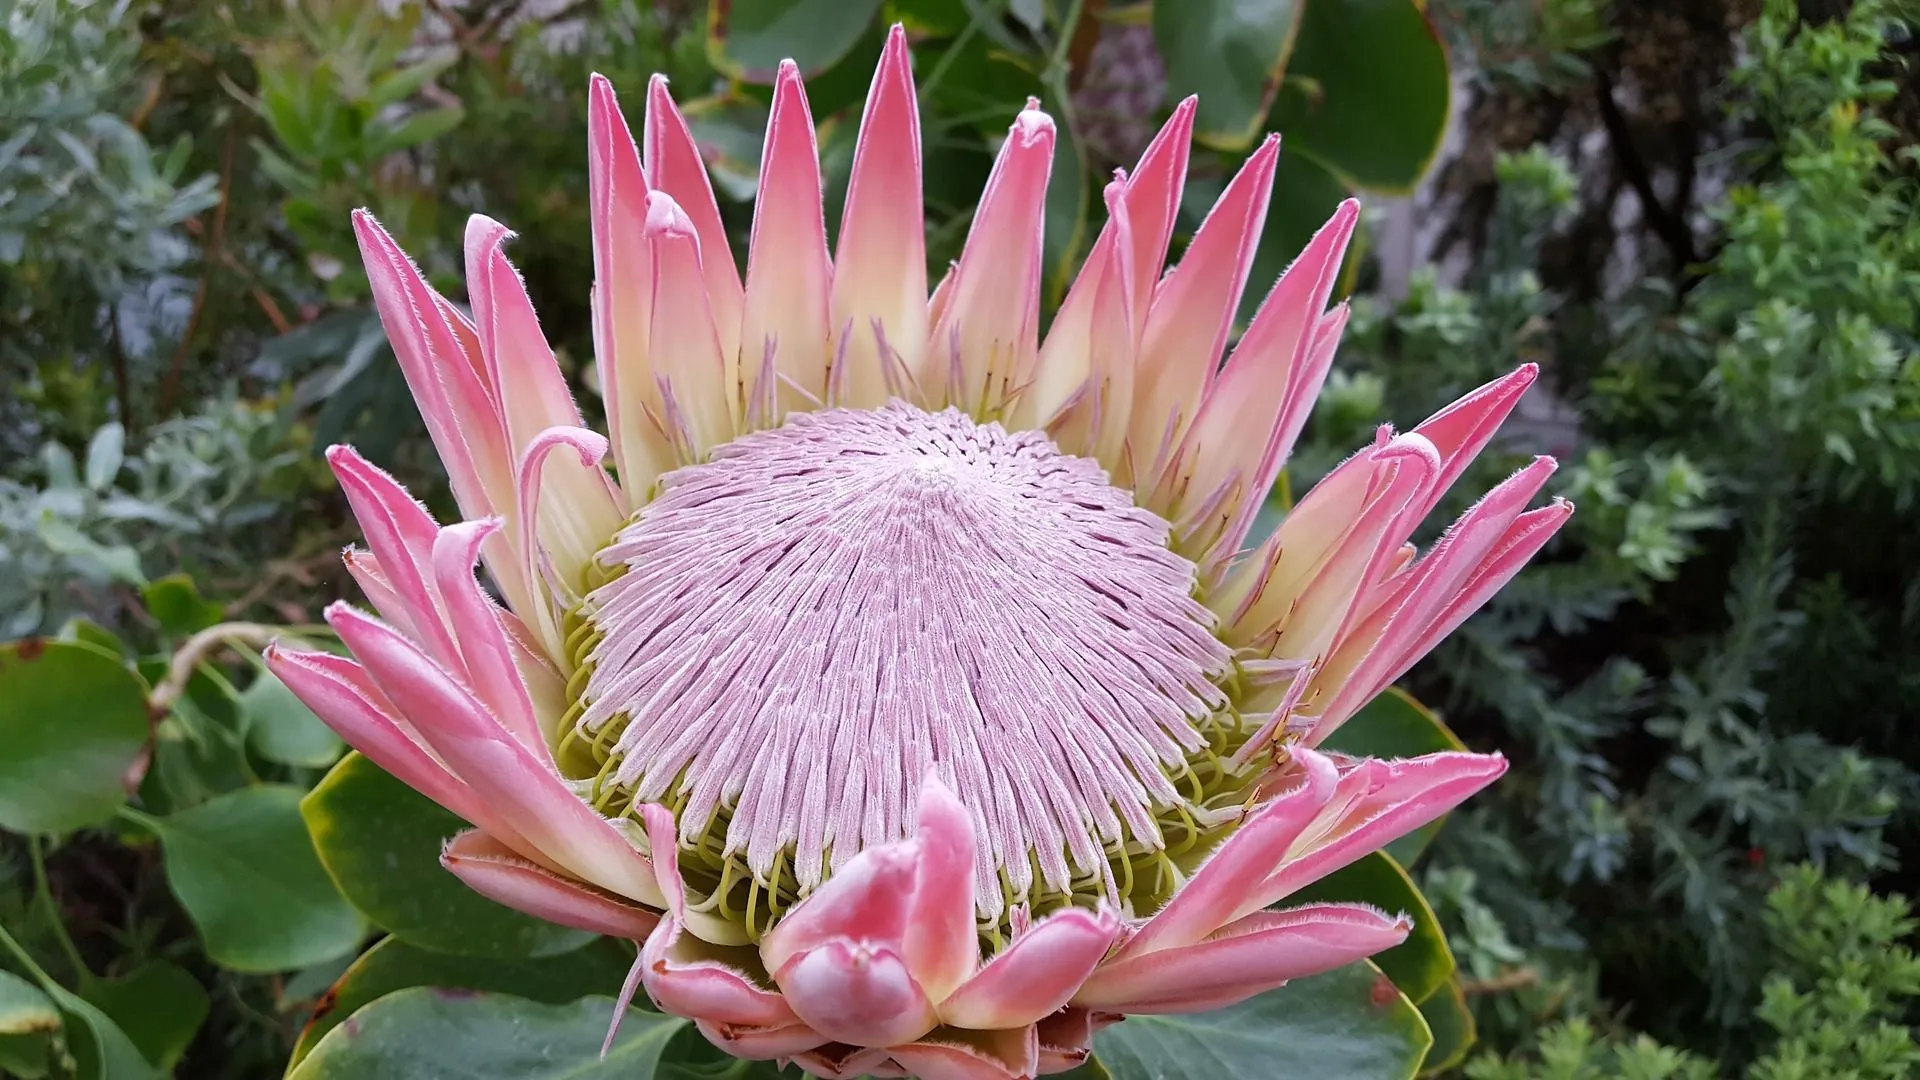 23 protea plant facts: a rare flowering plant from south africa